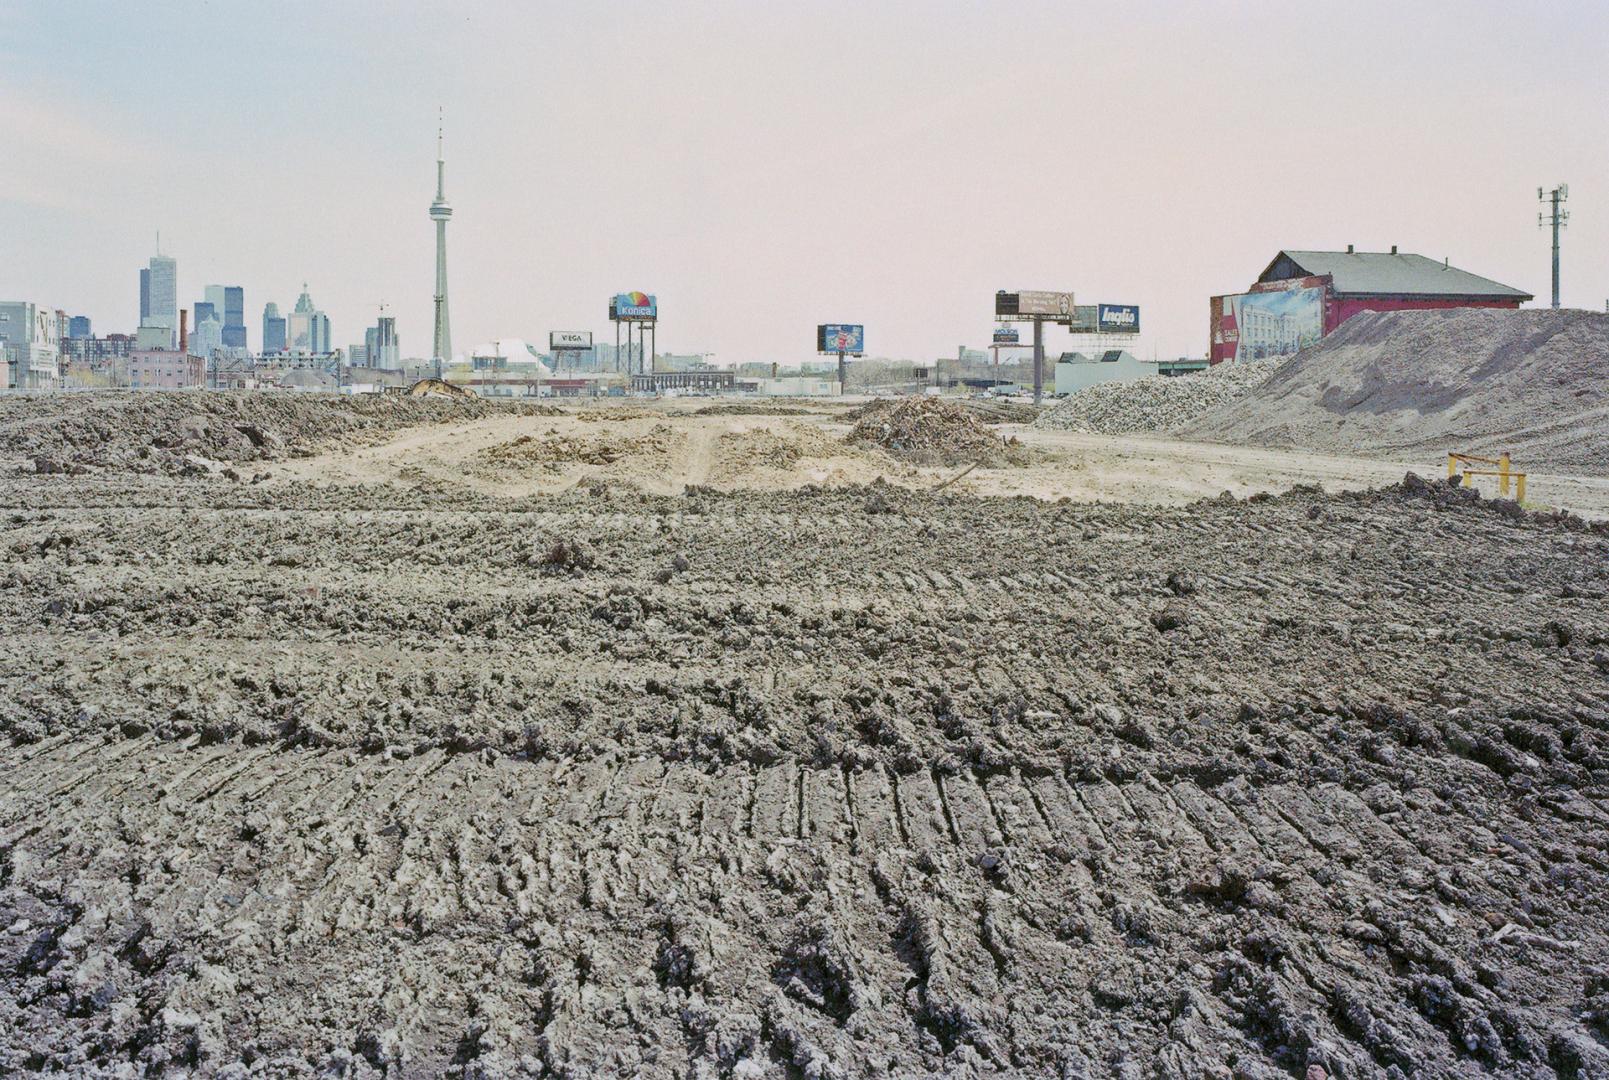 A photograph of a muddy field, with a shed visible to the right and the Toronto skyline includi ...